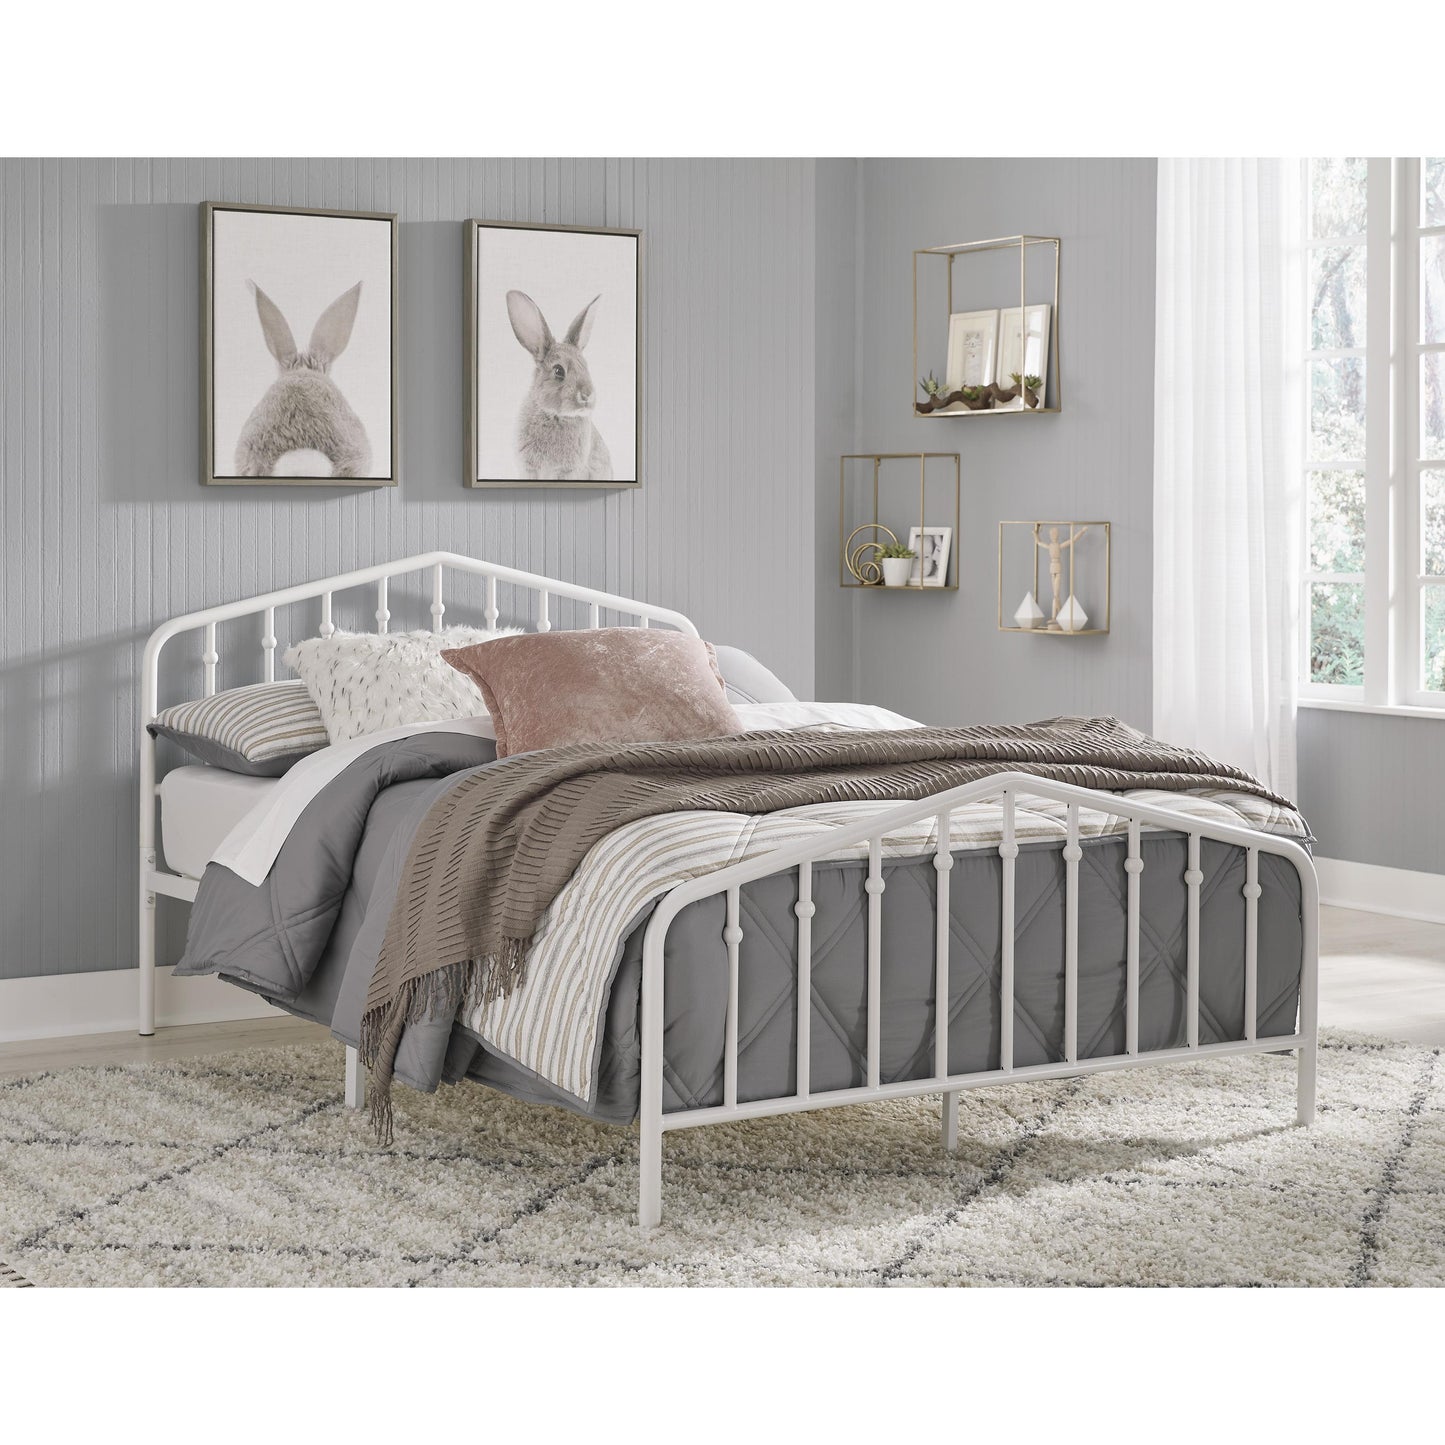 Signature Design by Ashley Kids Beds Bed B076-672 IMAGE 6